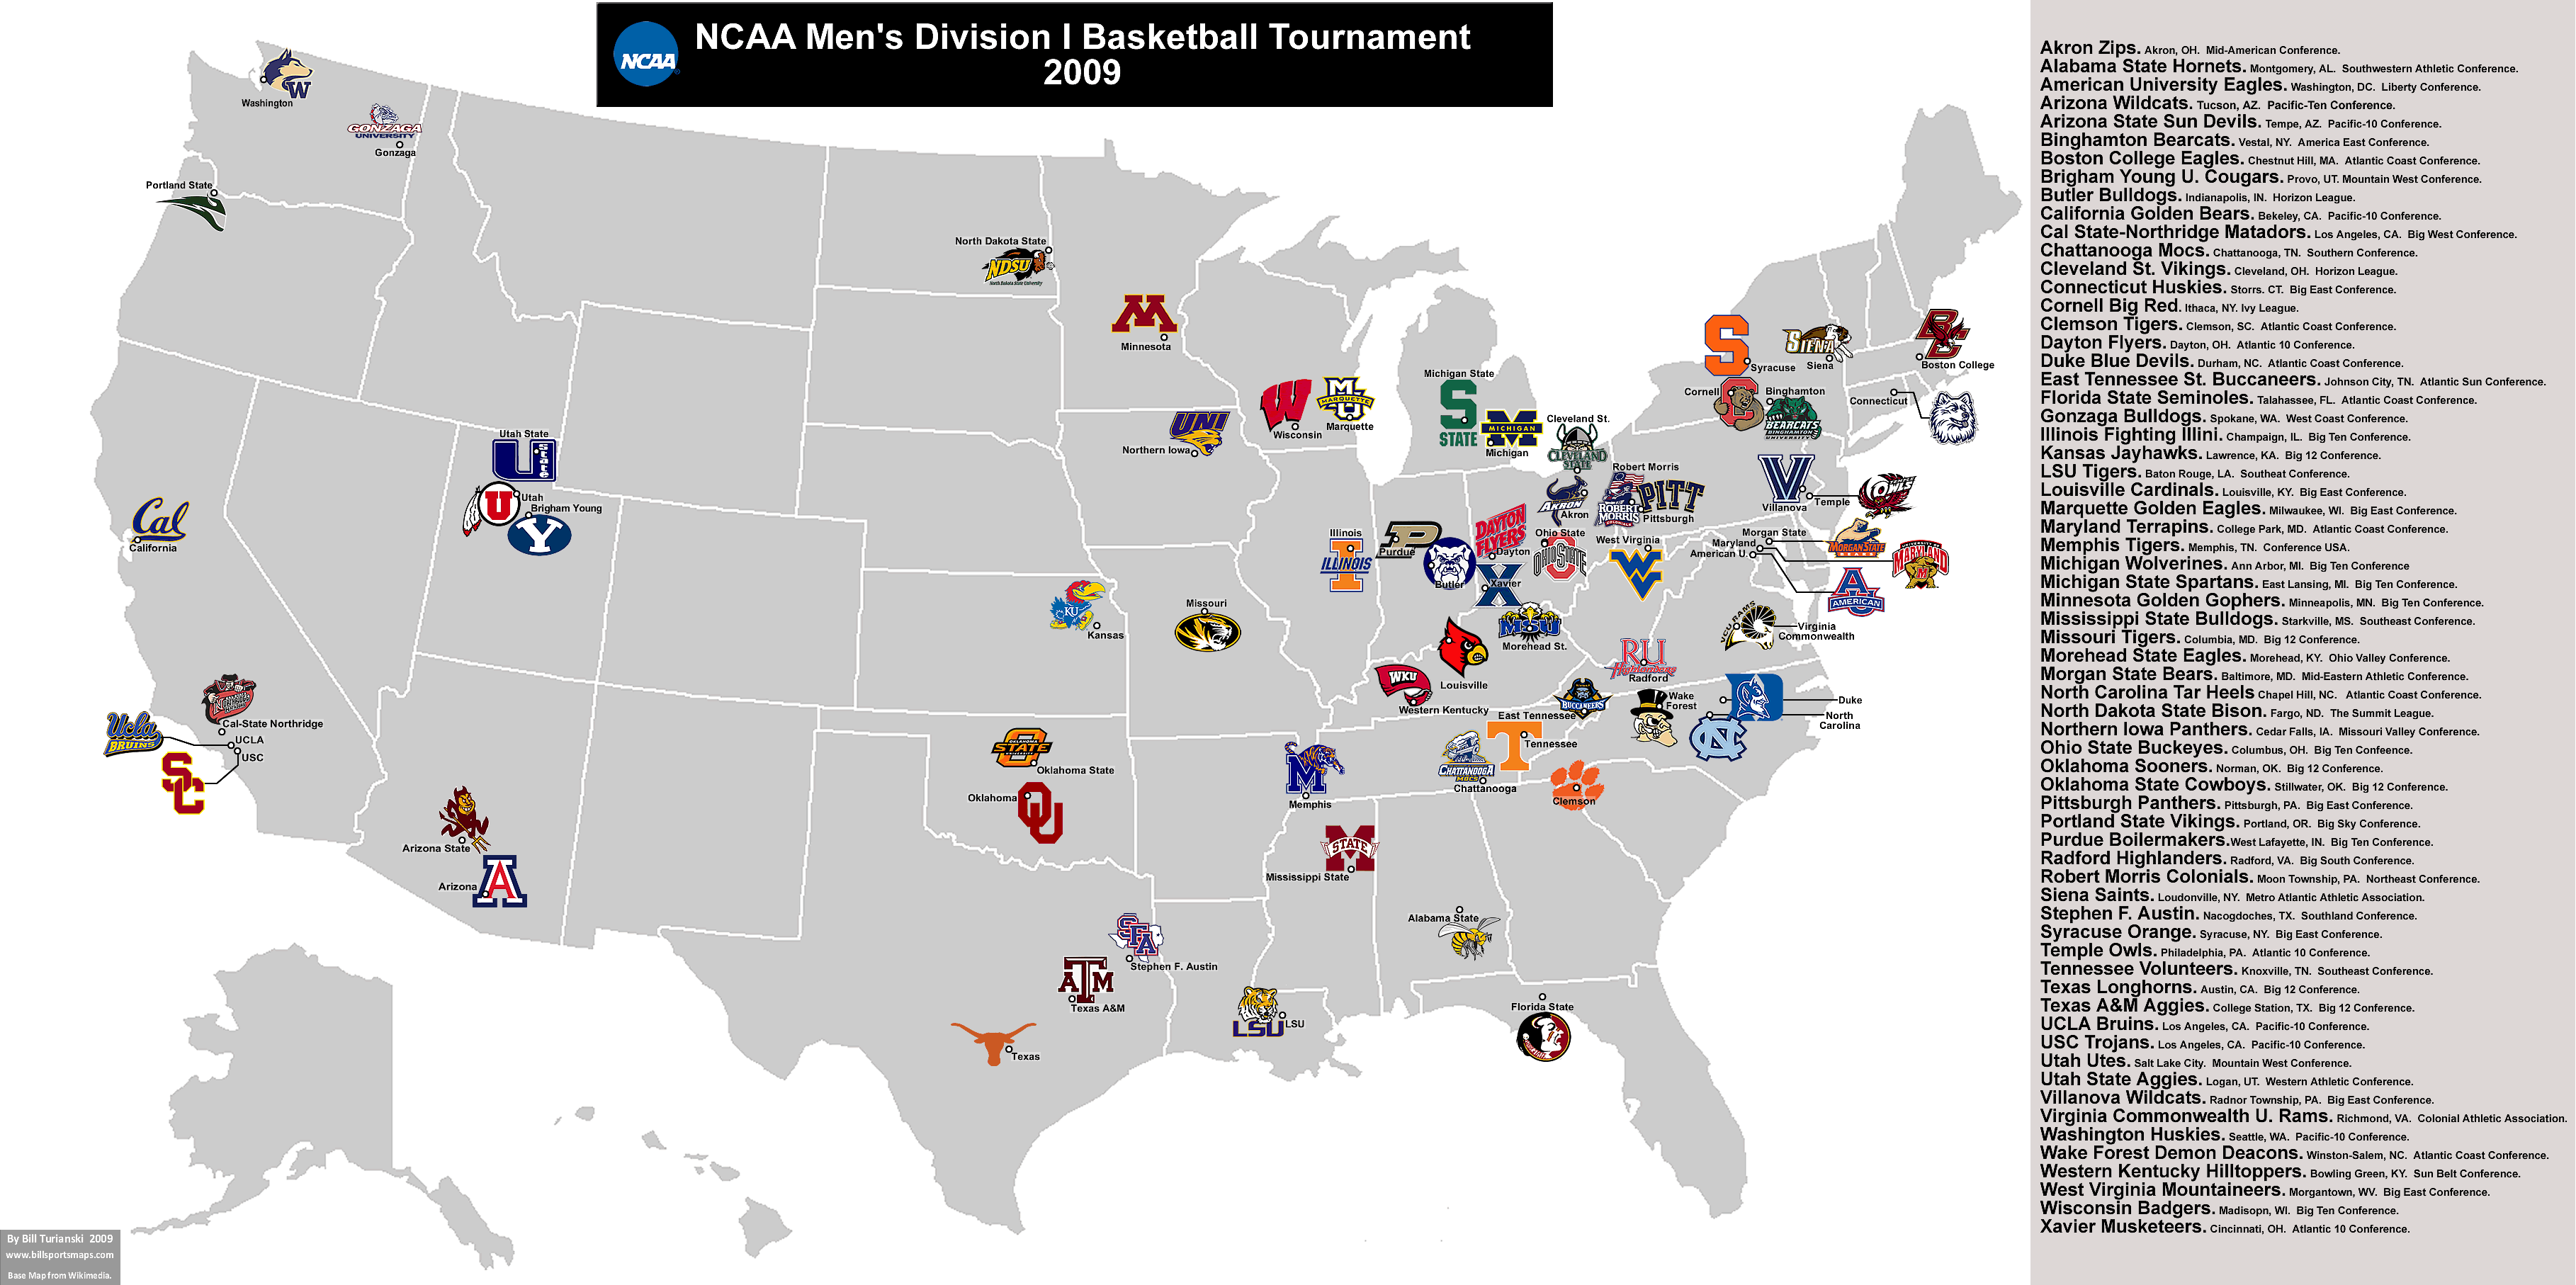 how many teams in the ncaa mens basketball tournament